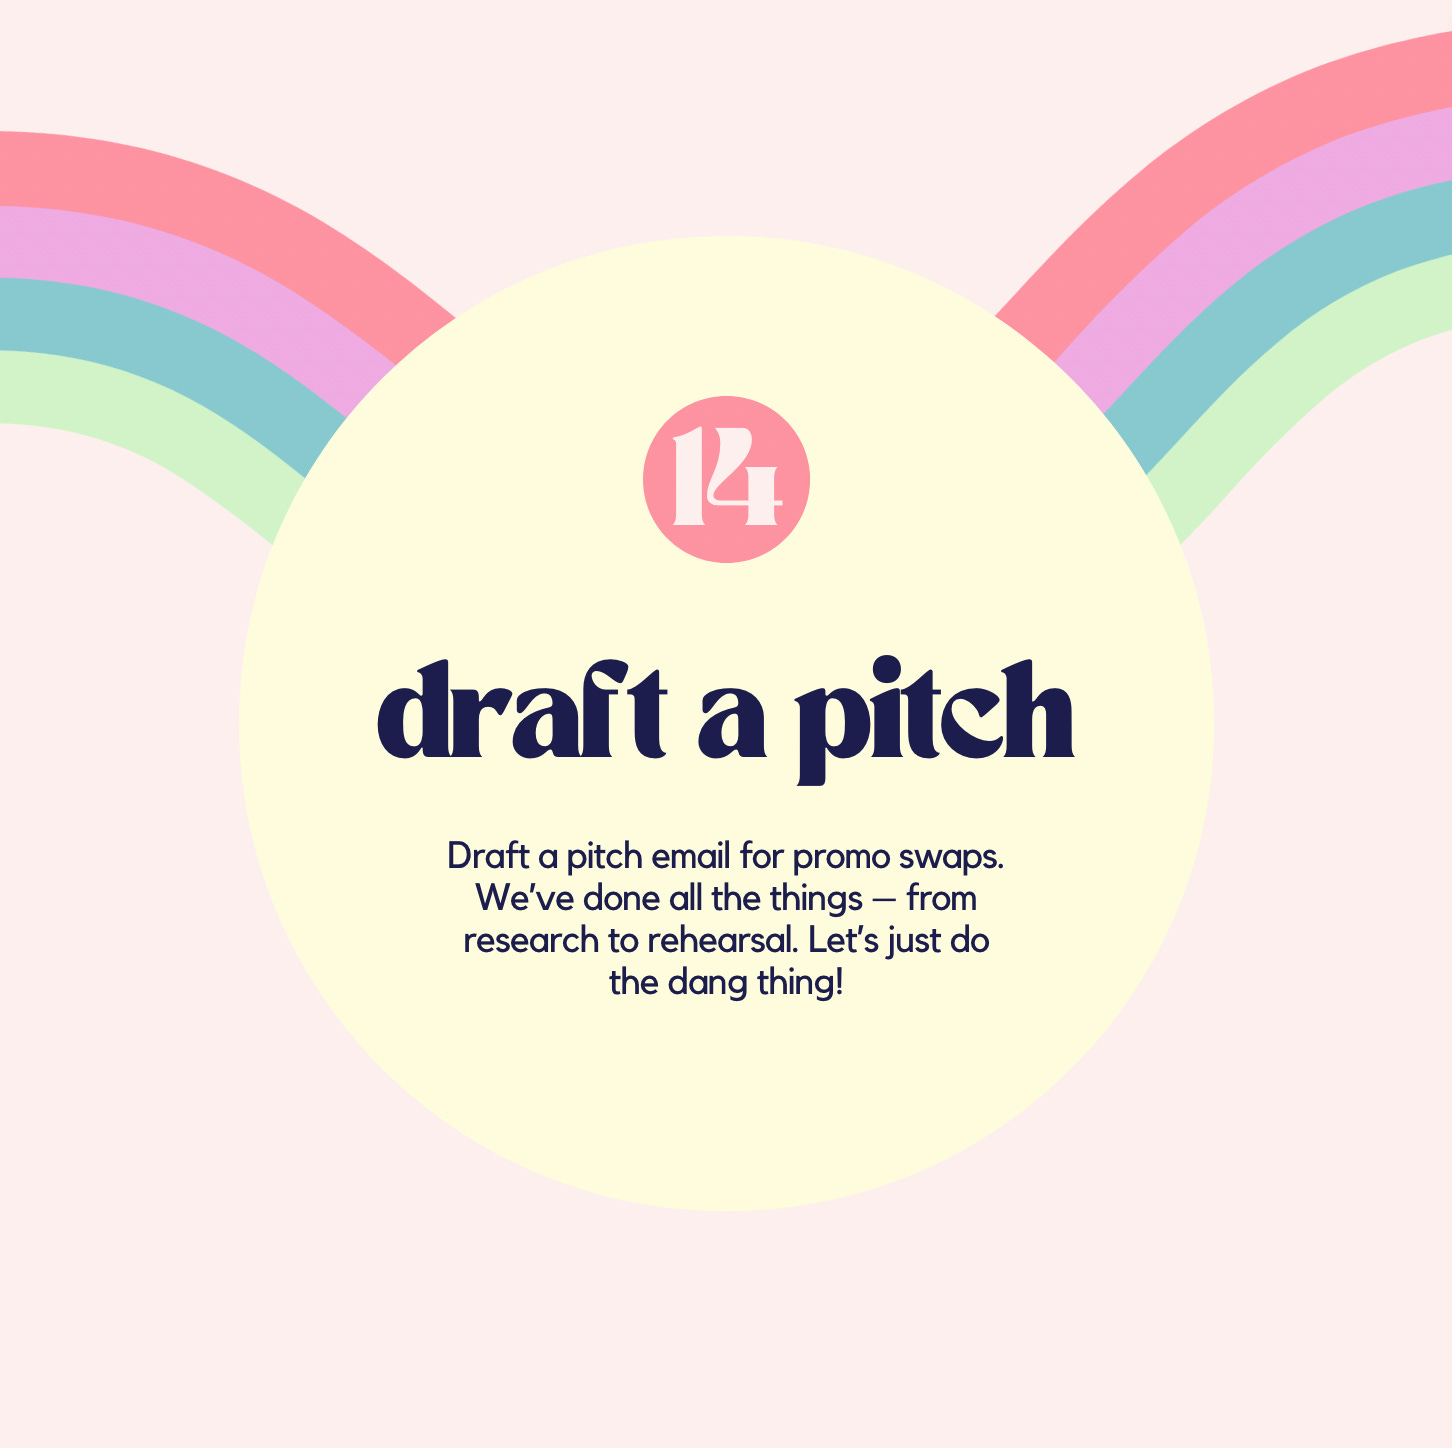 #14. draft a pitch email for promo swaps